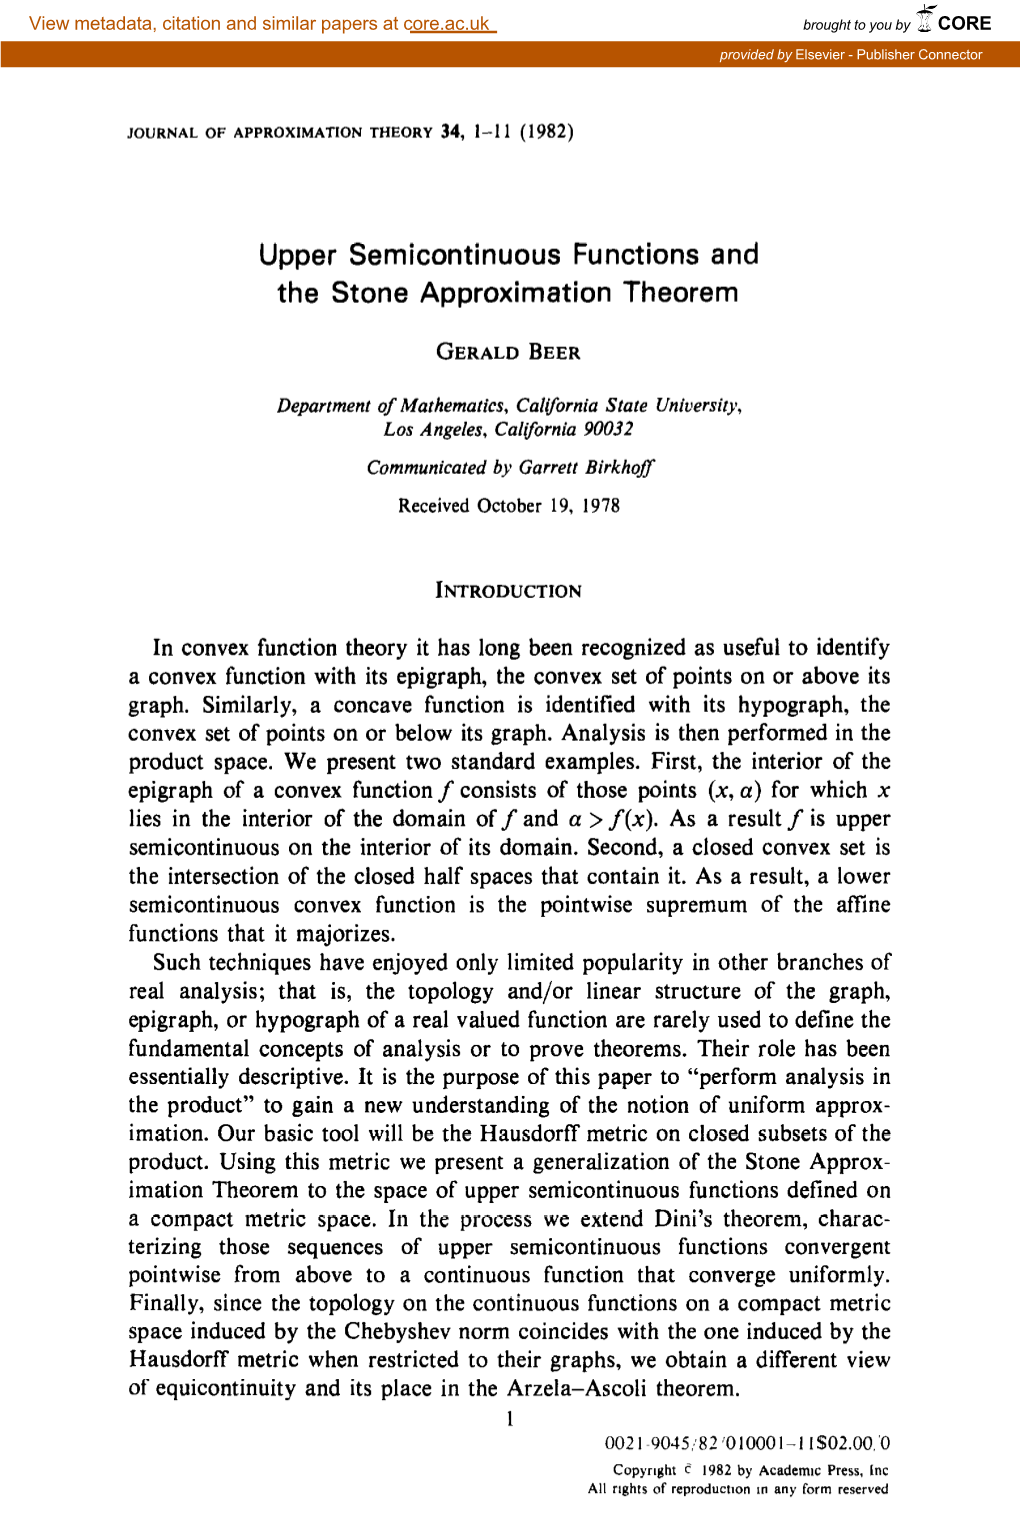 Upper Semicontinuous Functions and the Stone Approximation Theorem